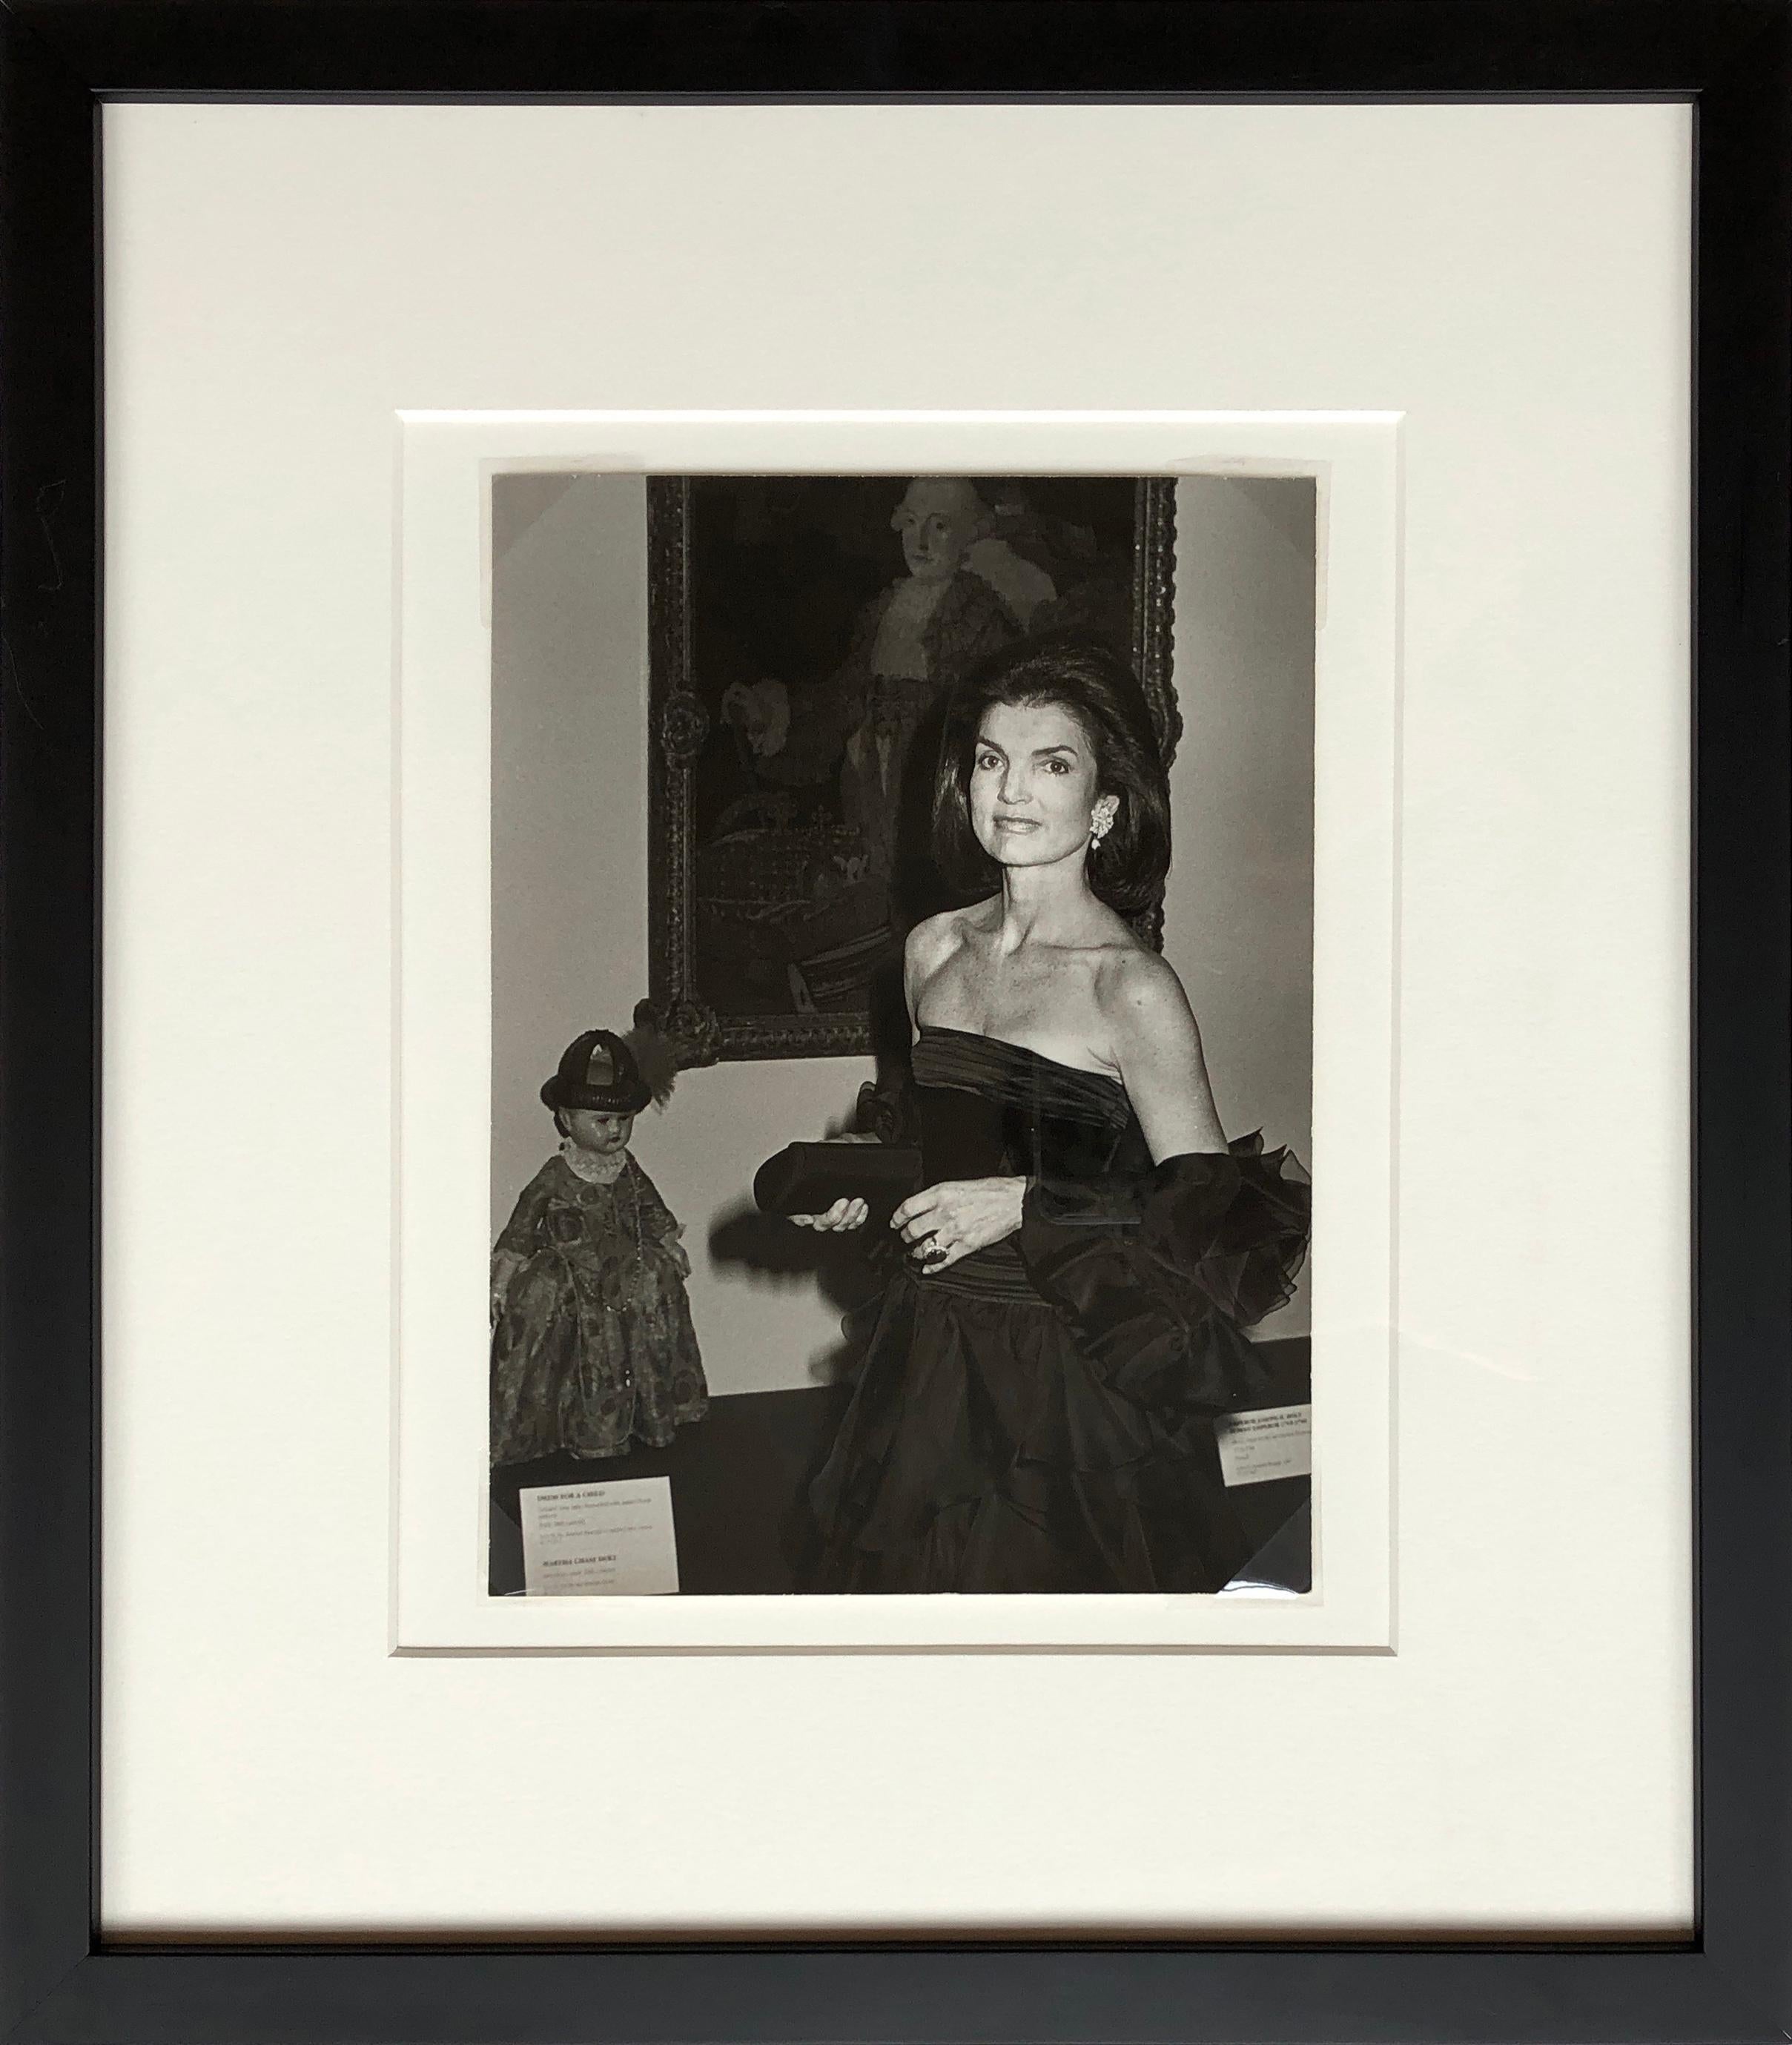 Ron Galella Portrait Photograph - Jacqueline Kennedy Onassis at the Metropolitan Museum of Art